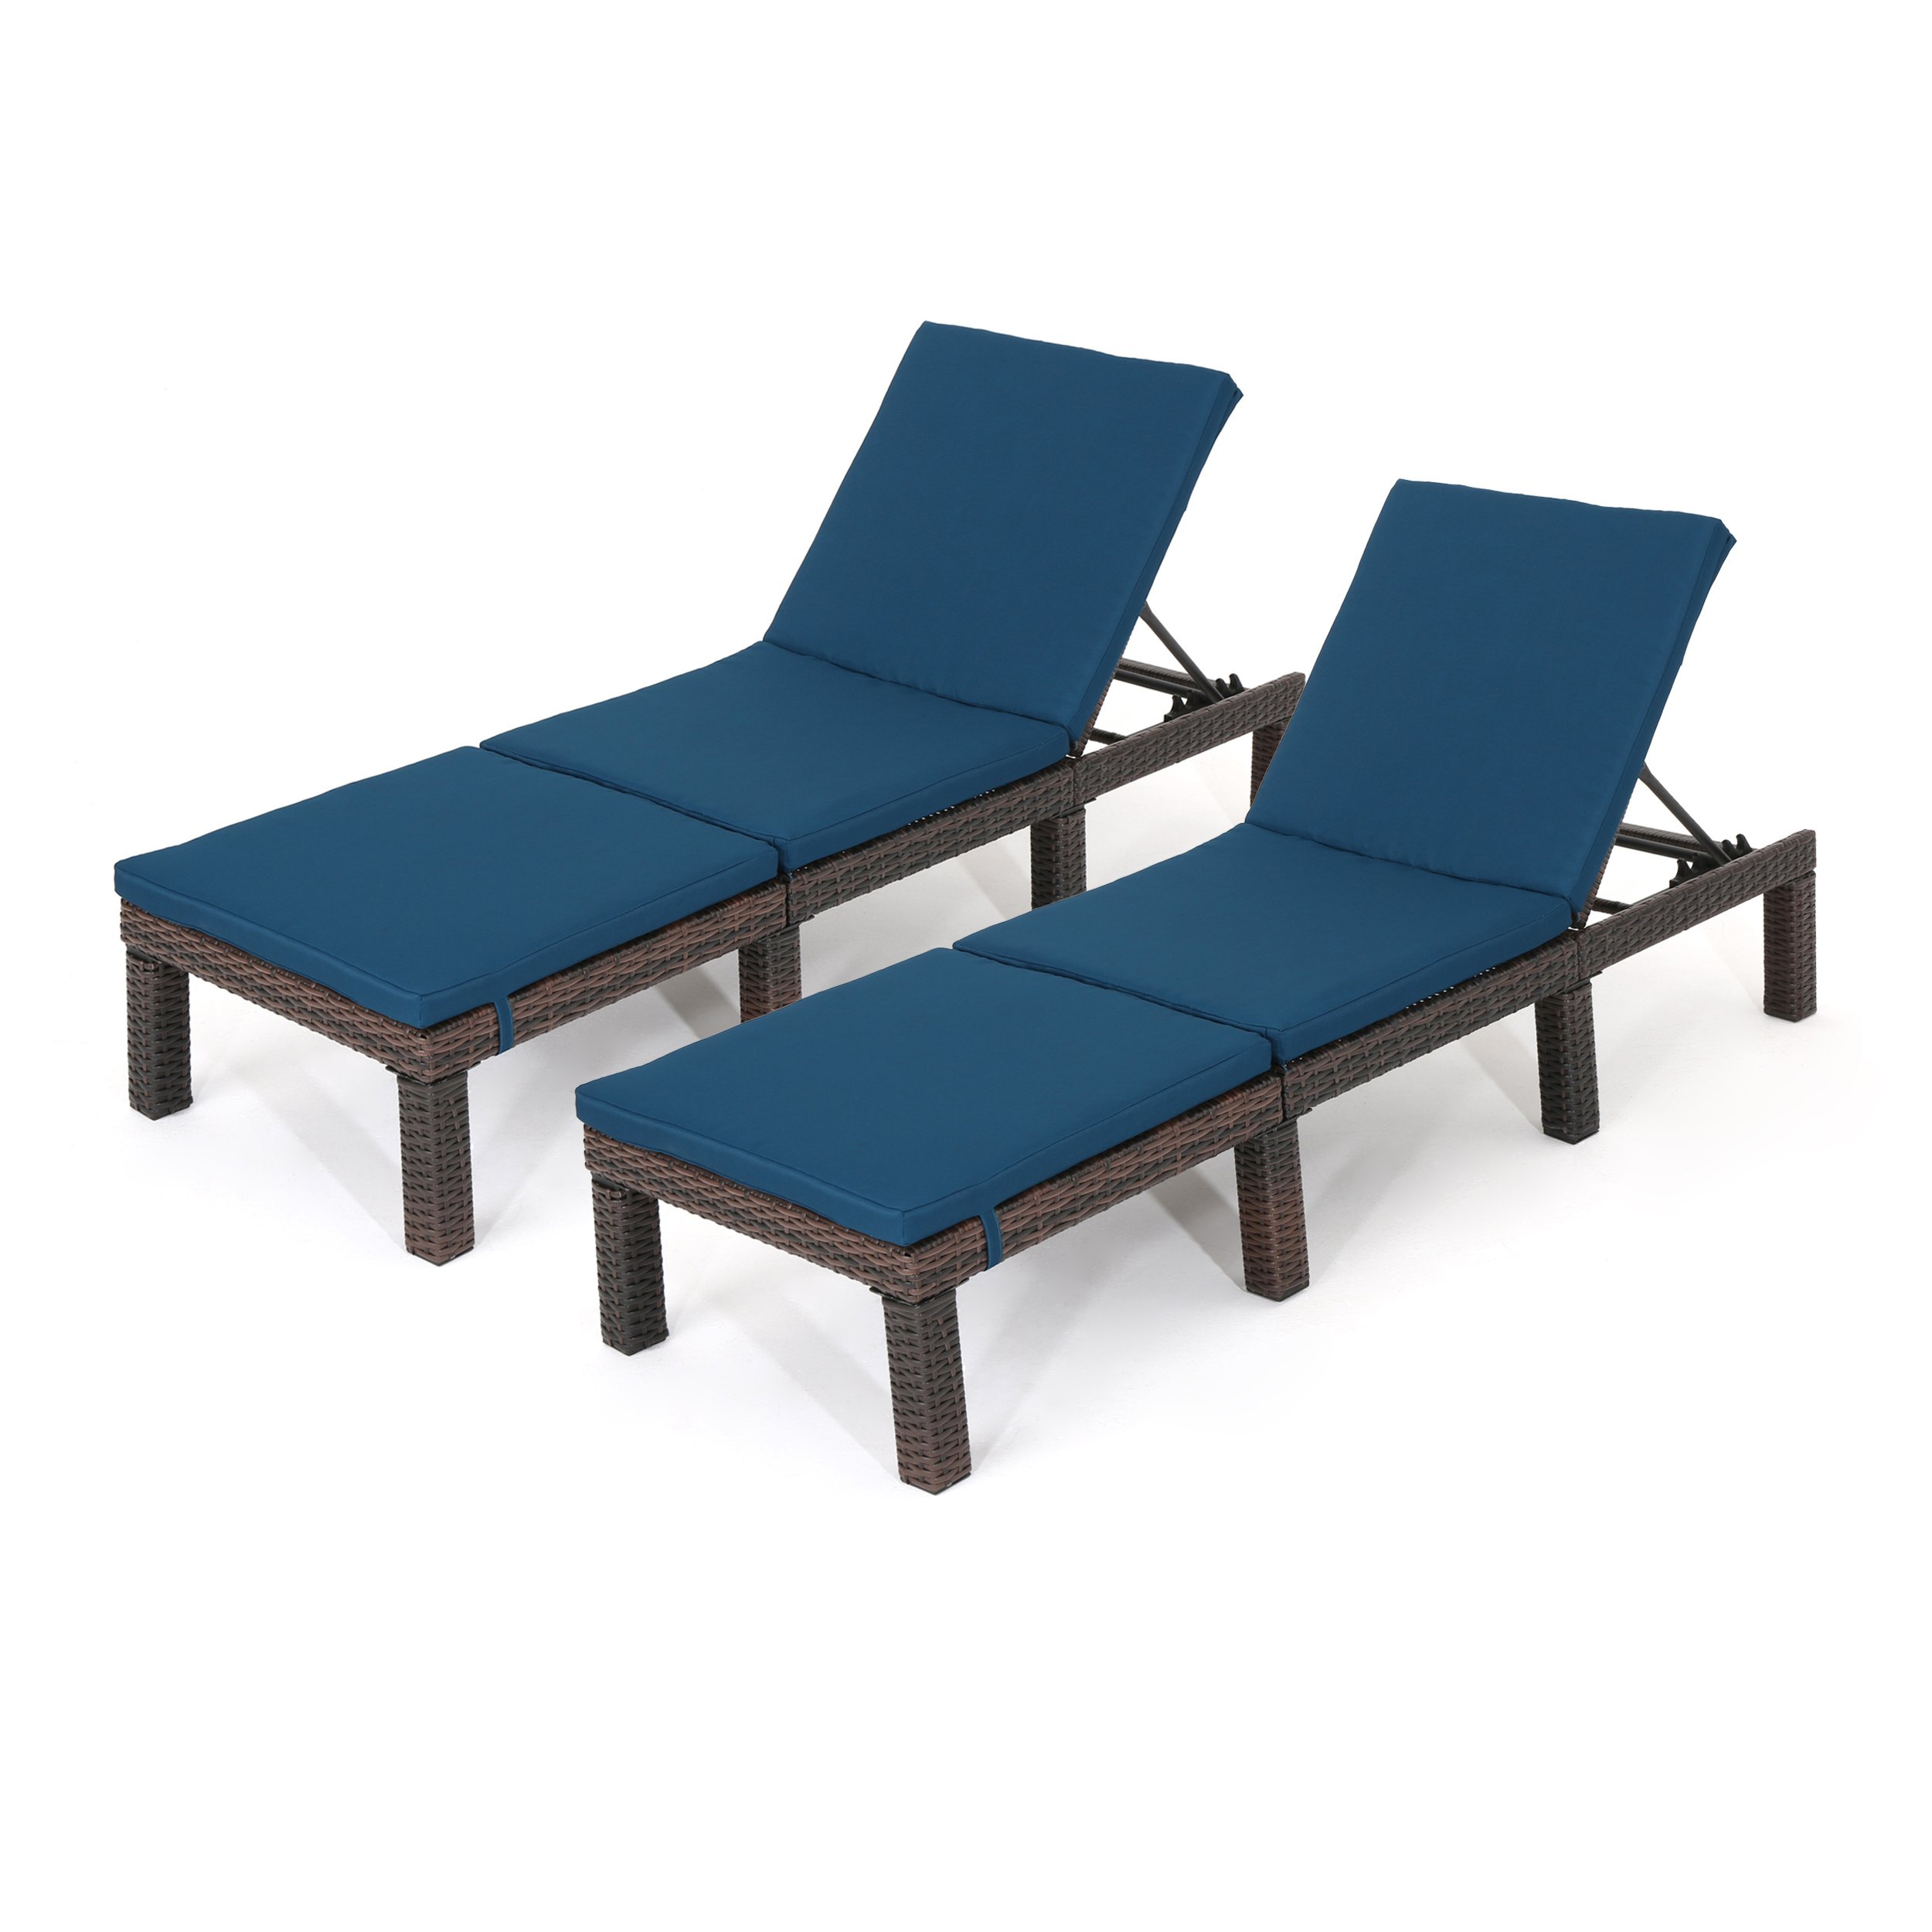 Joyce Outdoor Wicker Chaise Lounge, Set of 2, Multibrown and Blue - image 1 of 6